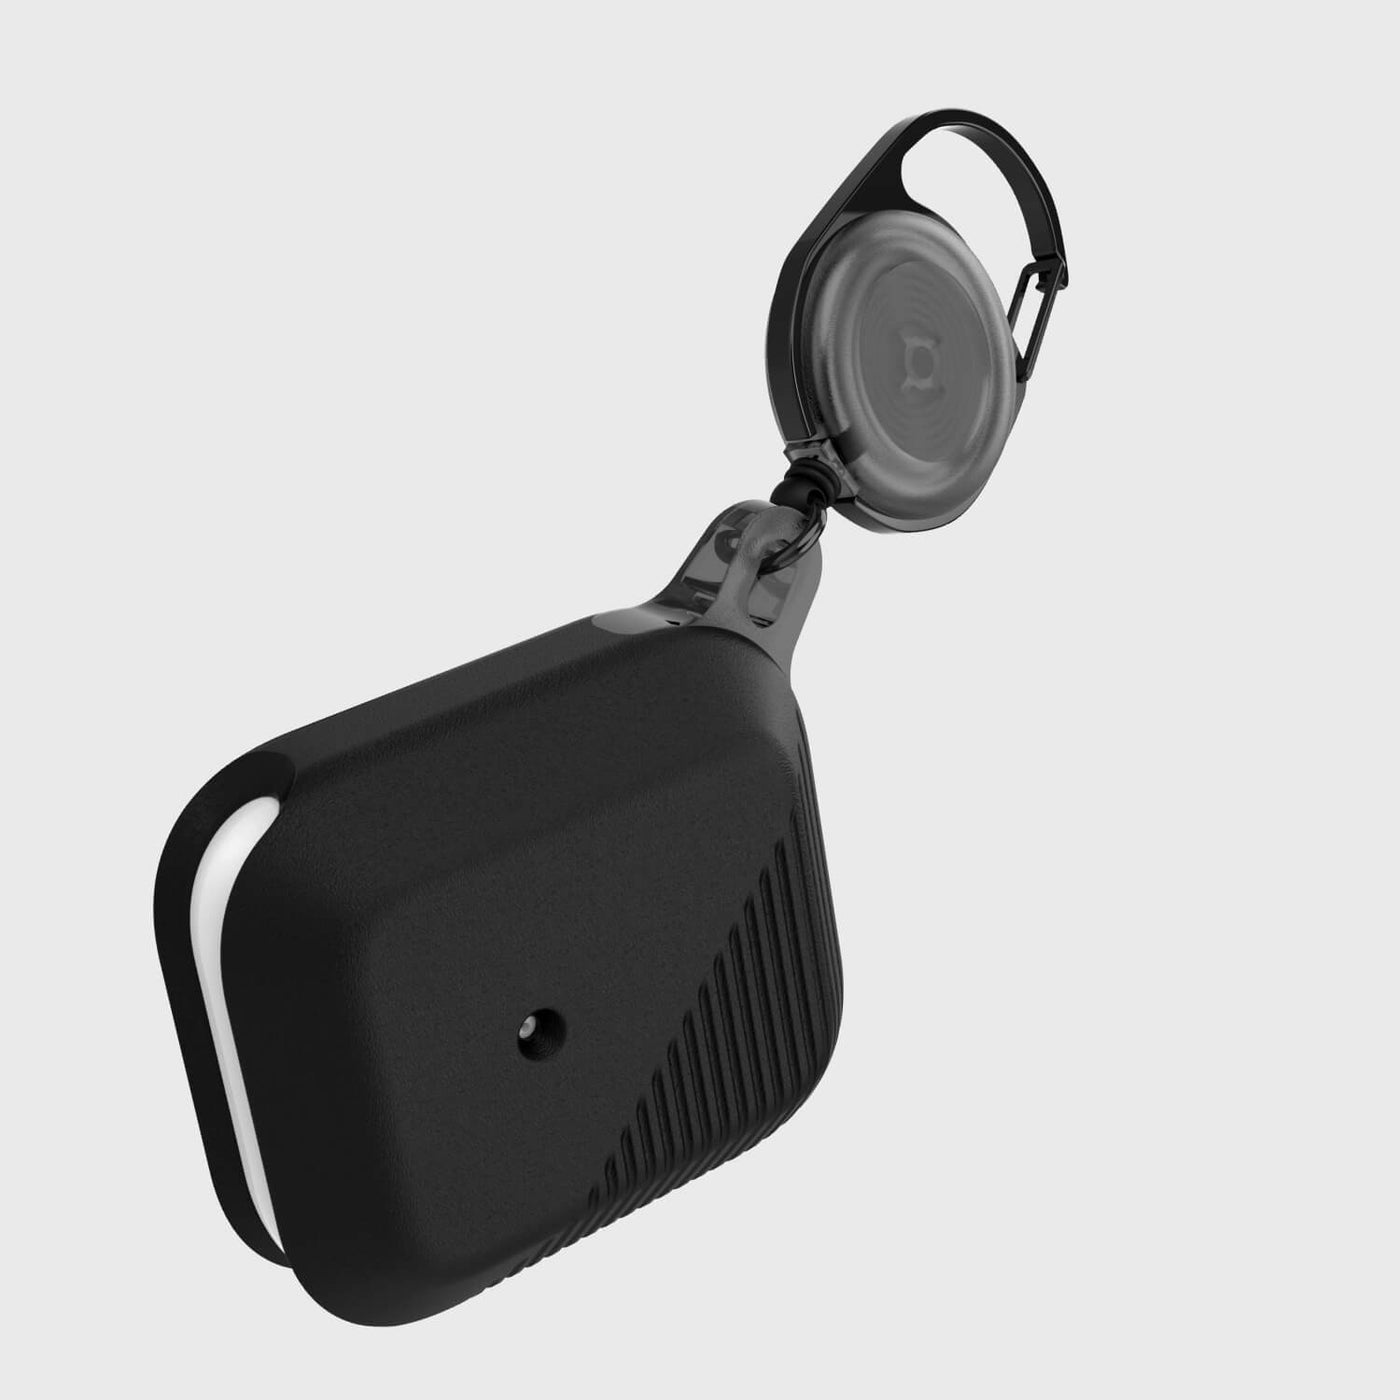 Soft silicone protective case for AirPods with retractable carabiner. Raptic radius in black.